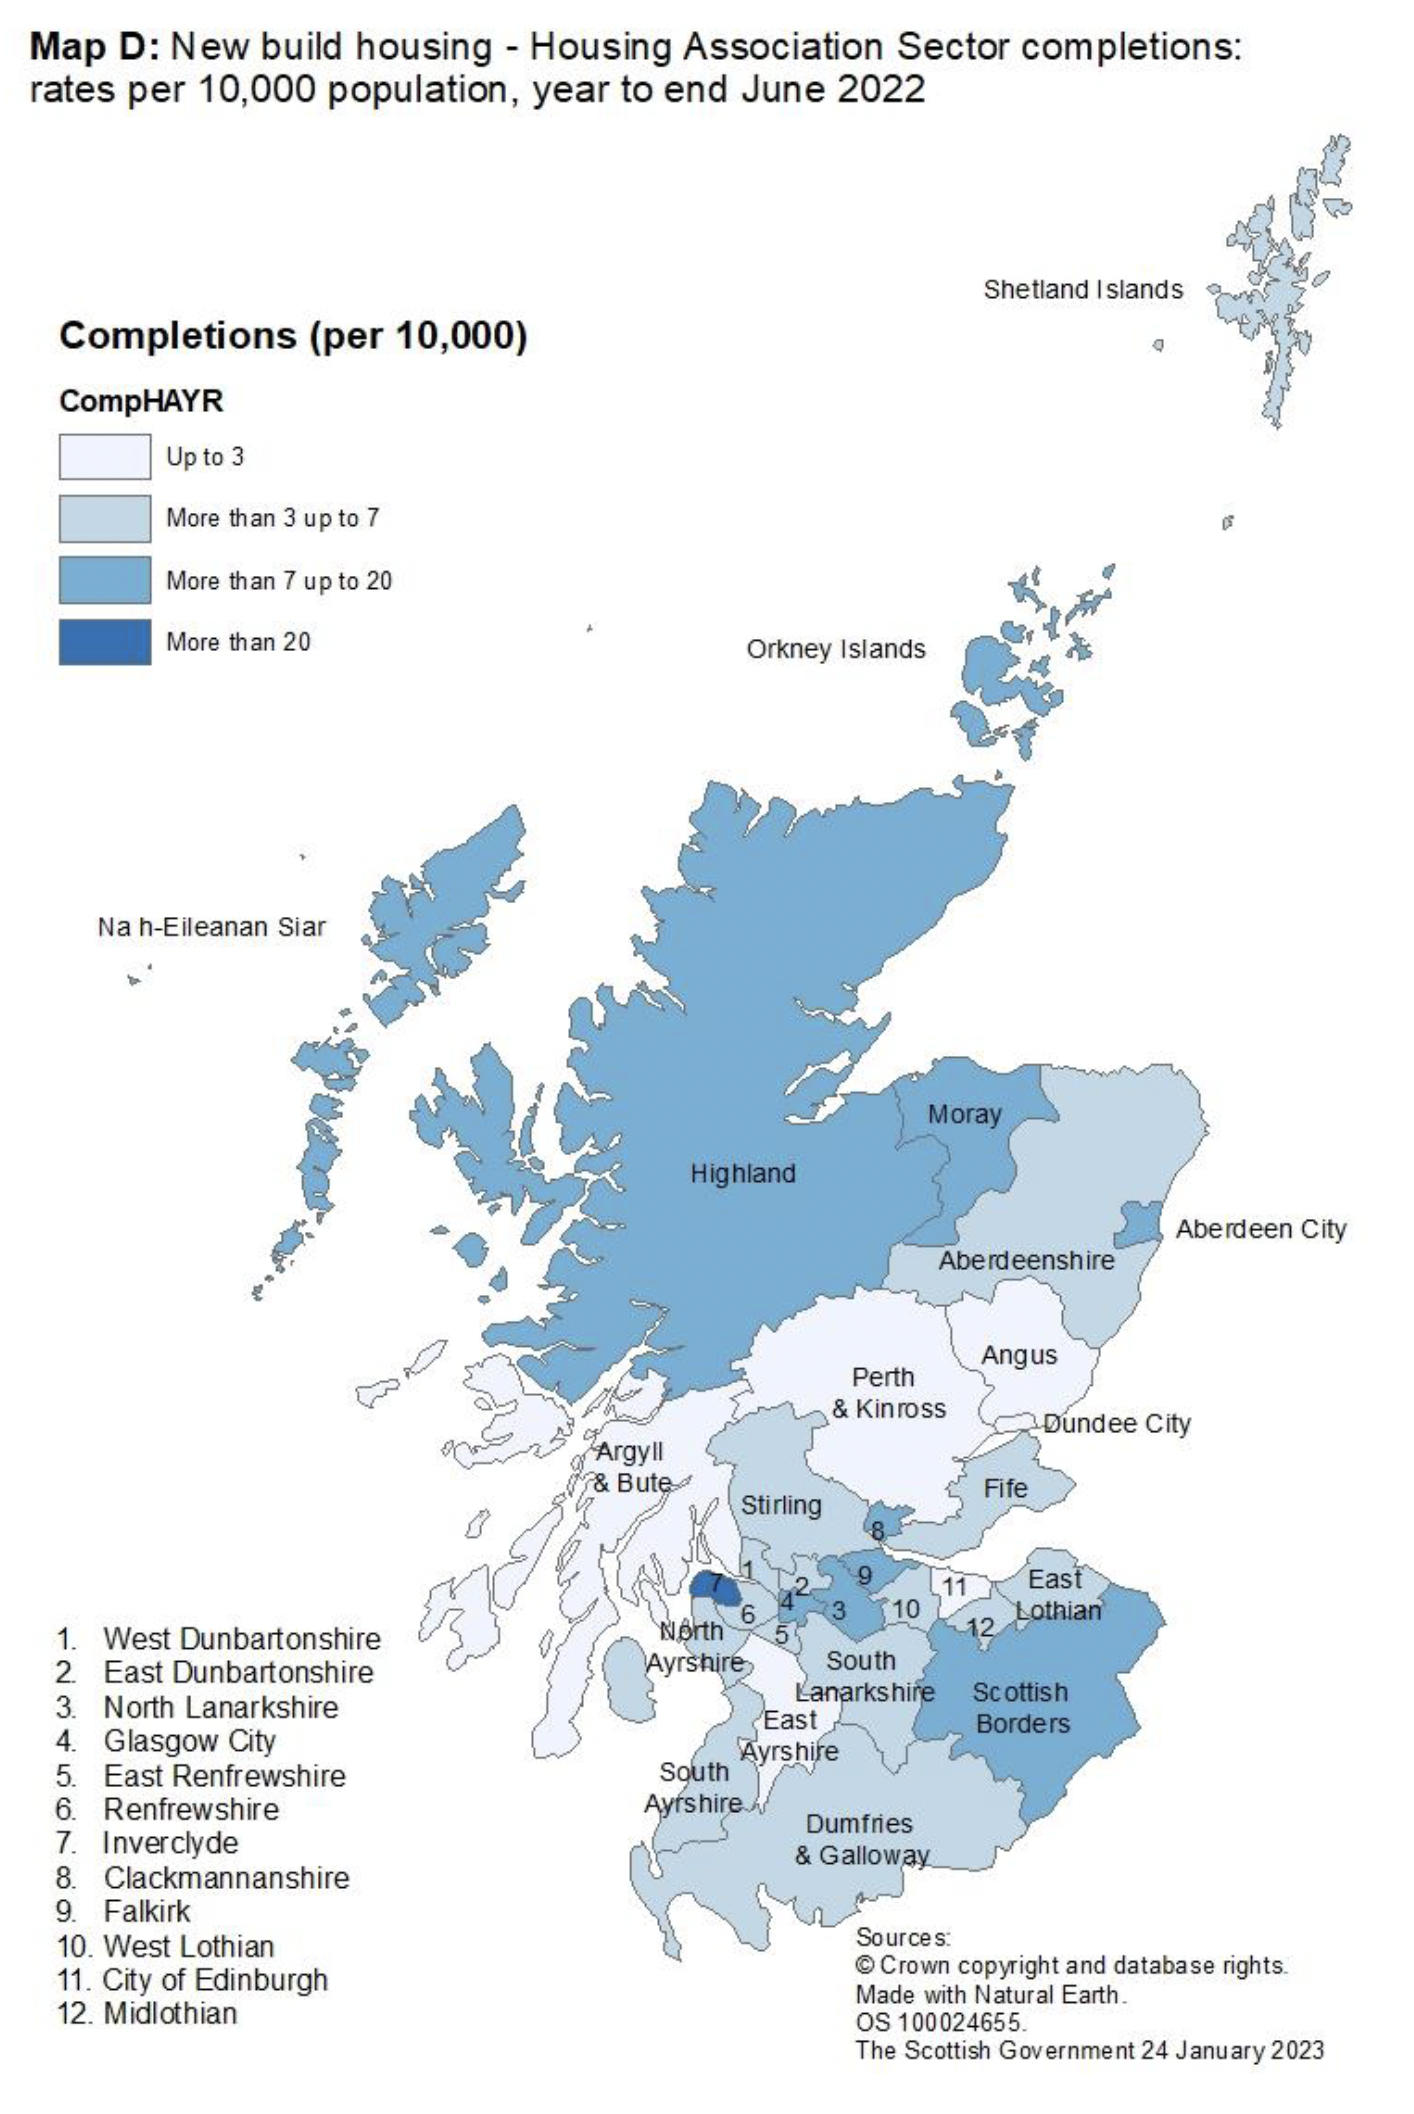 Map D: New build housing – A map of local authority areas in Scotland showing housing association completion rates per 10,000 population for year to end June 2022. The highest rates were observed in Inverclyde. There were less than three completions in East Ayrshire, Dundee City, Argyll & Bute, Edinburgh City, Angus, and Perth & Kinross.